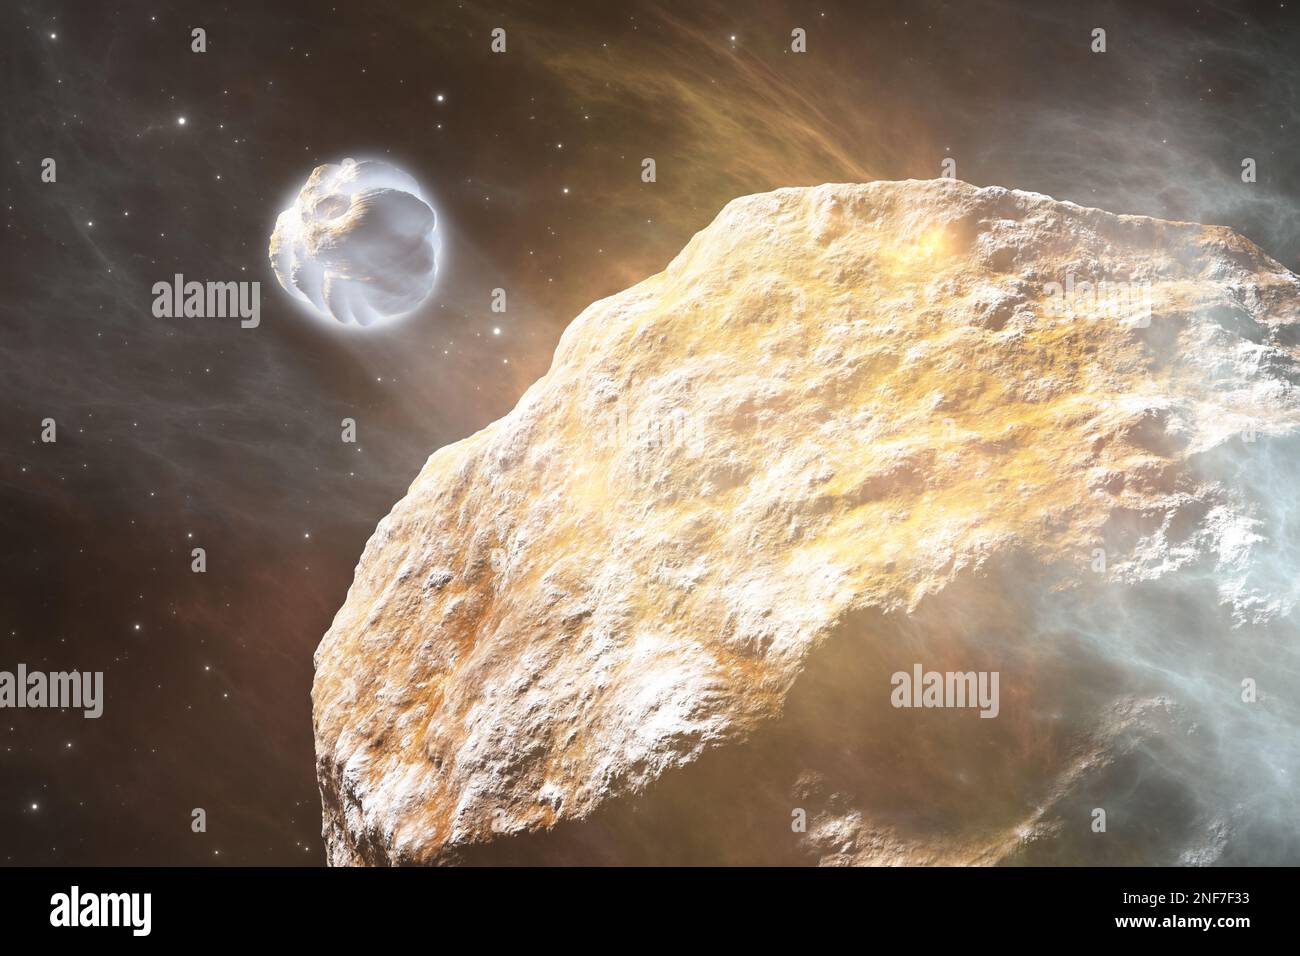 Asteroids near perihelion in the process of ice and frozen carbon dioxide sublimation at the highest subsolar temperatures. 3D illustration Stock Photo